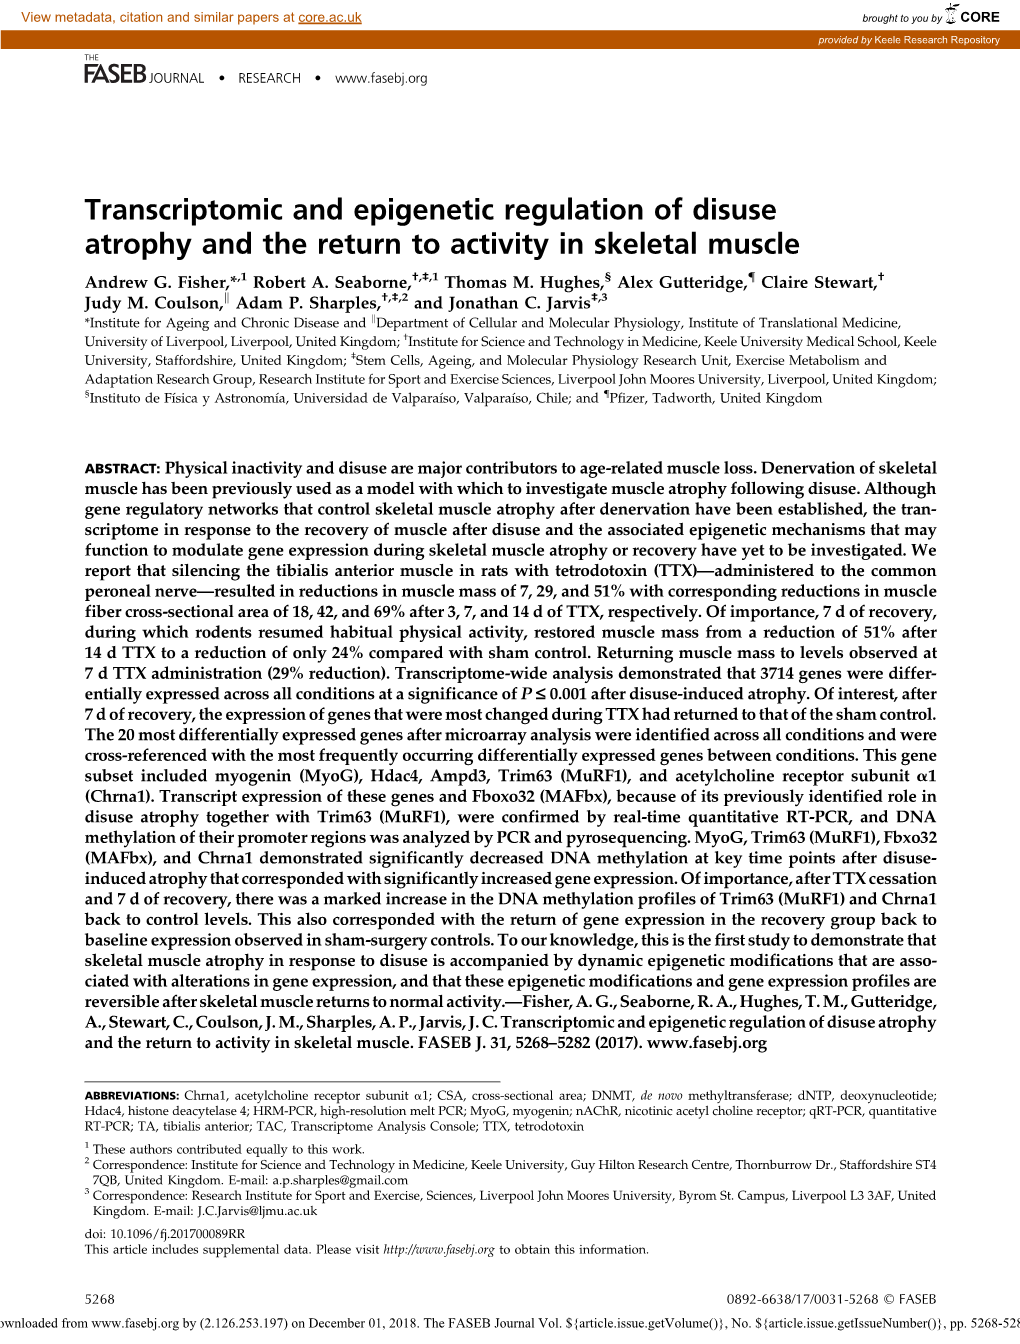 Transcriptomic and Epigenetic Regulation of Disuse Atrophy and the Return to Activity in Skeletal Muscle † ‡ § { † Andrew G